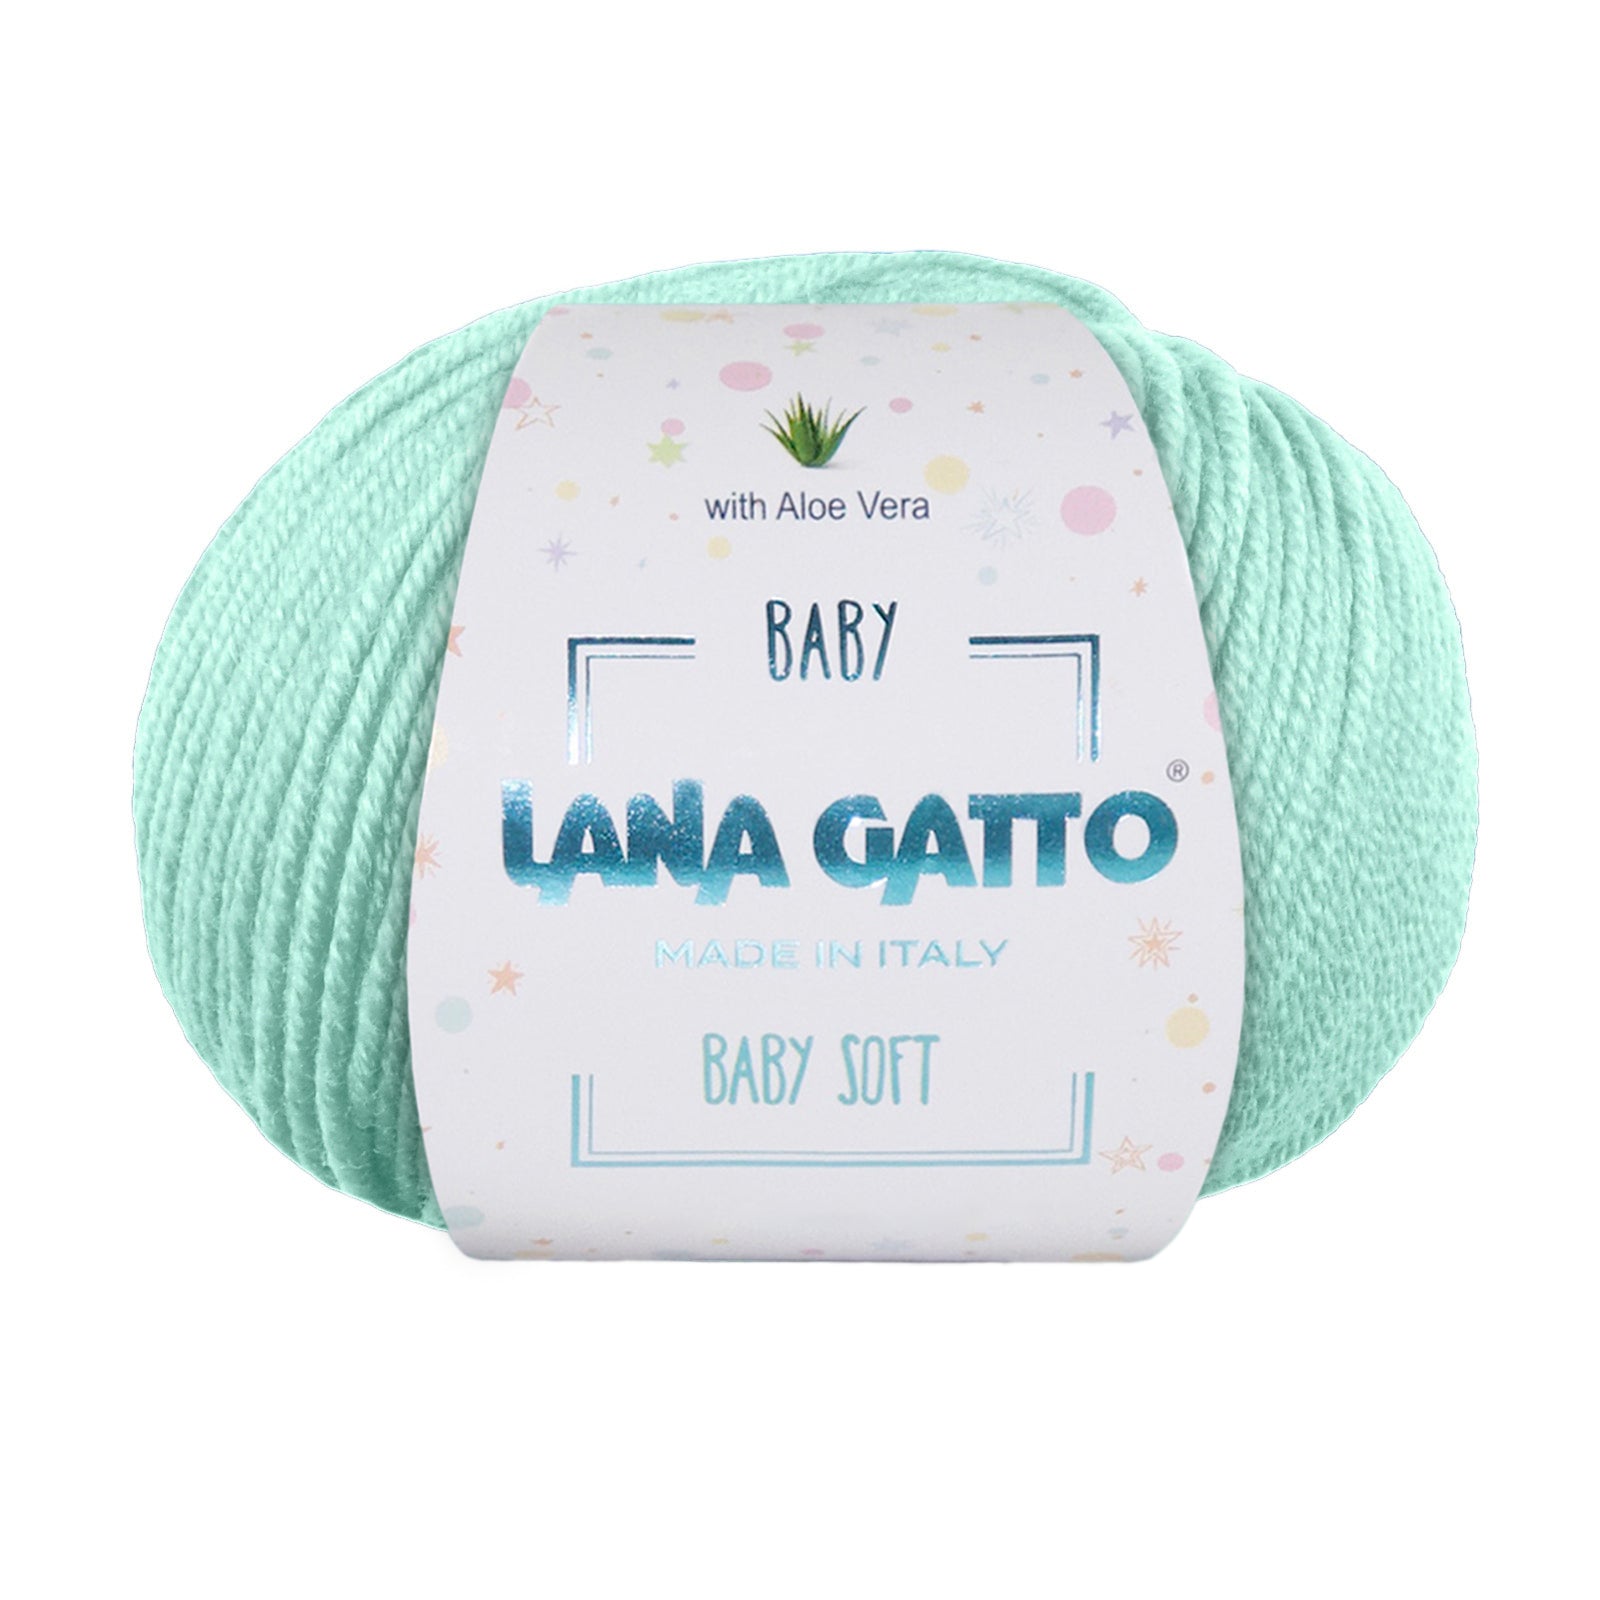 100% Pure Virgin Merino Wool Extrafine, Lana Gatto Baby Soft Line With Aloe Vera - Green and Light Blue Colors